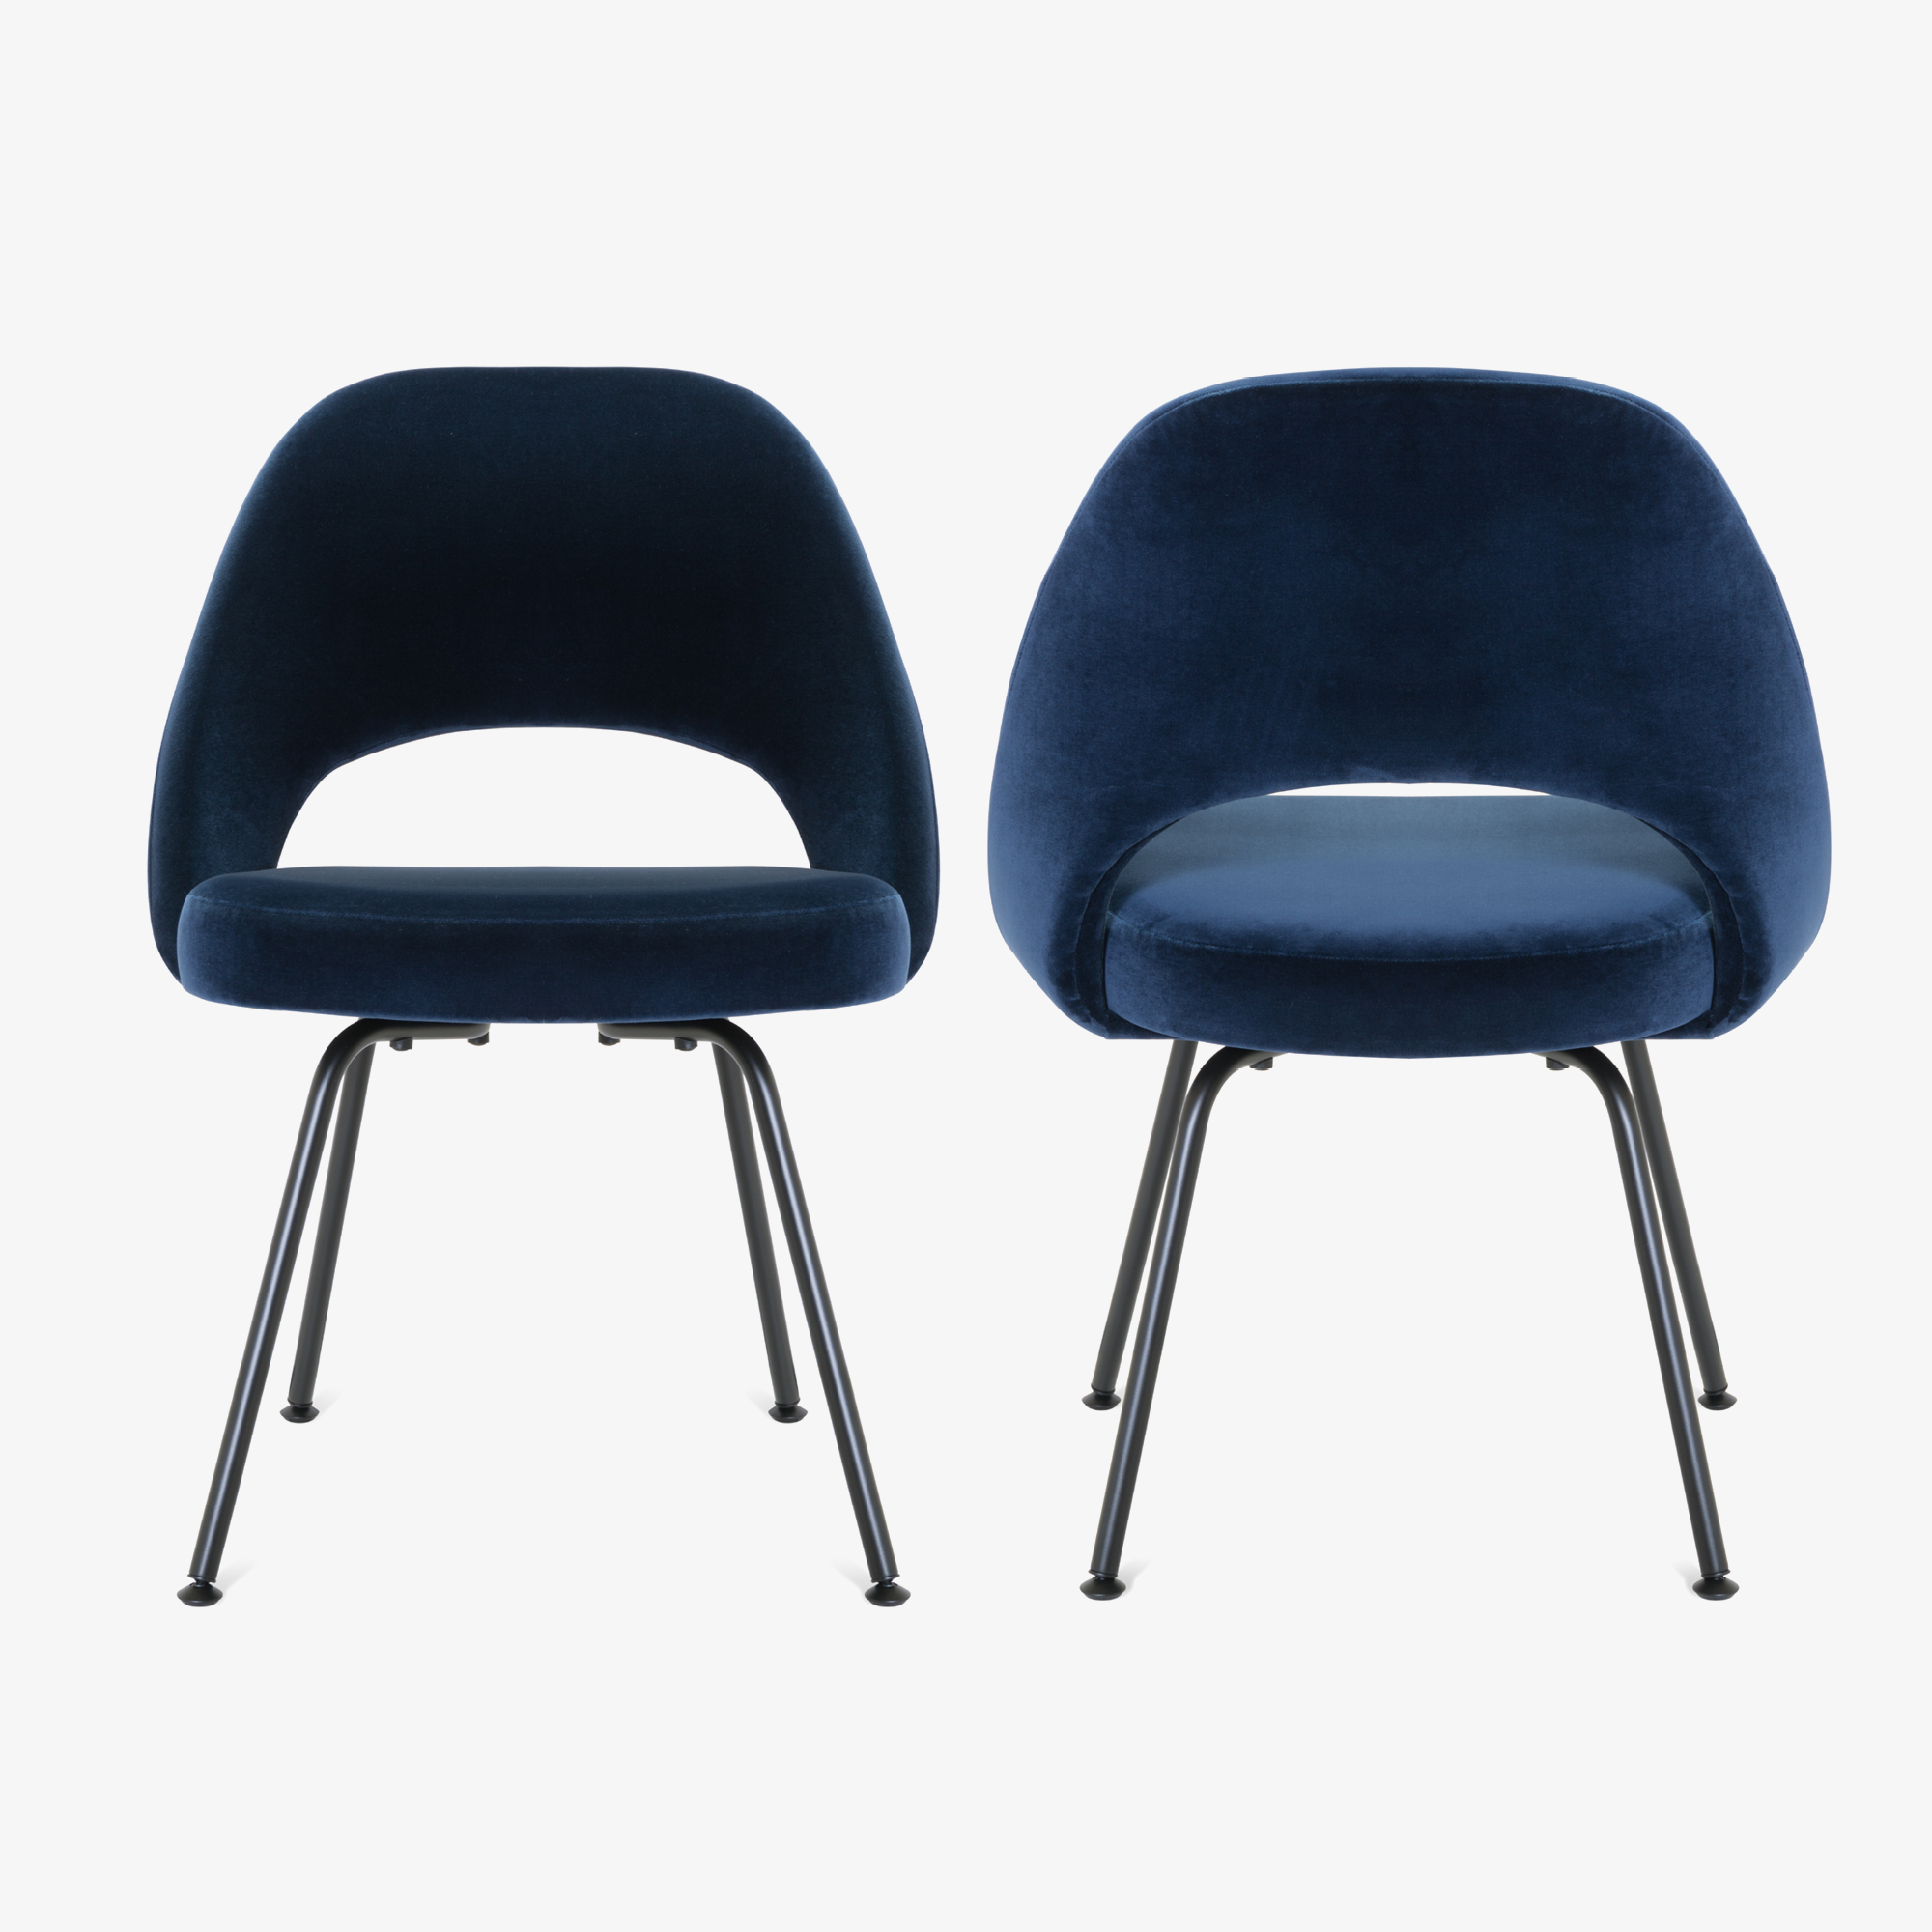 Saarinen Executive Armless Chairs in Navy Velvet, Black Edition5.png